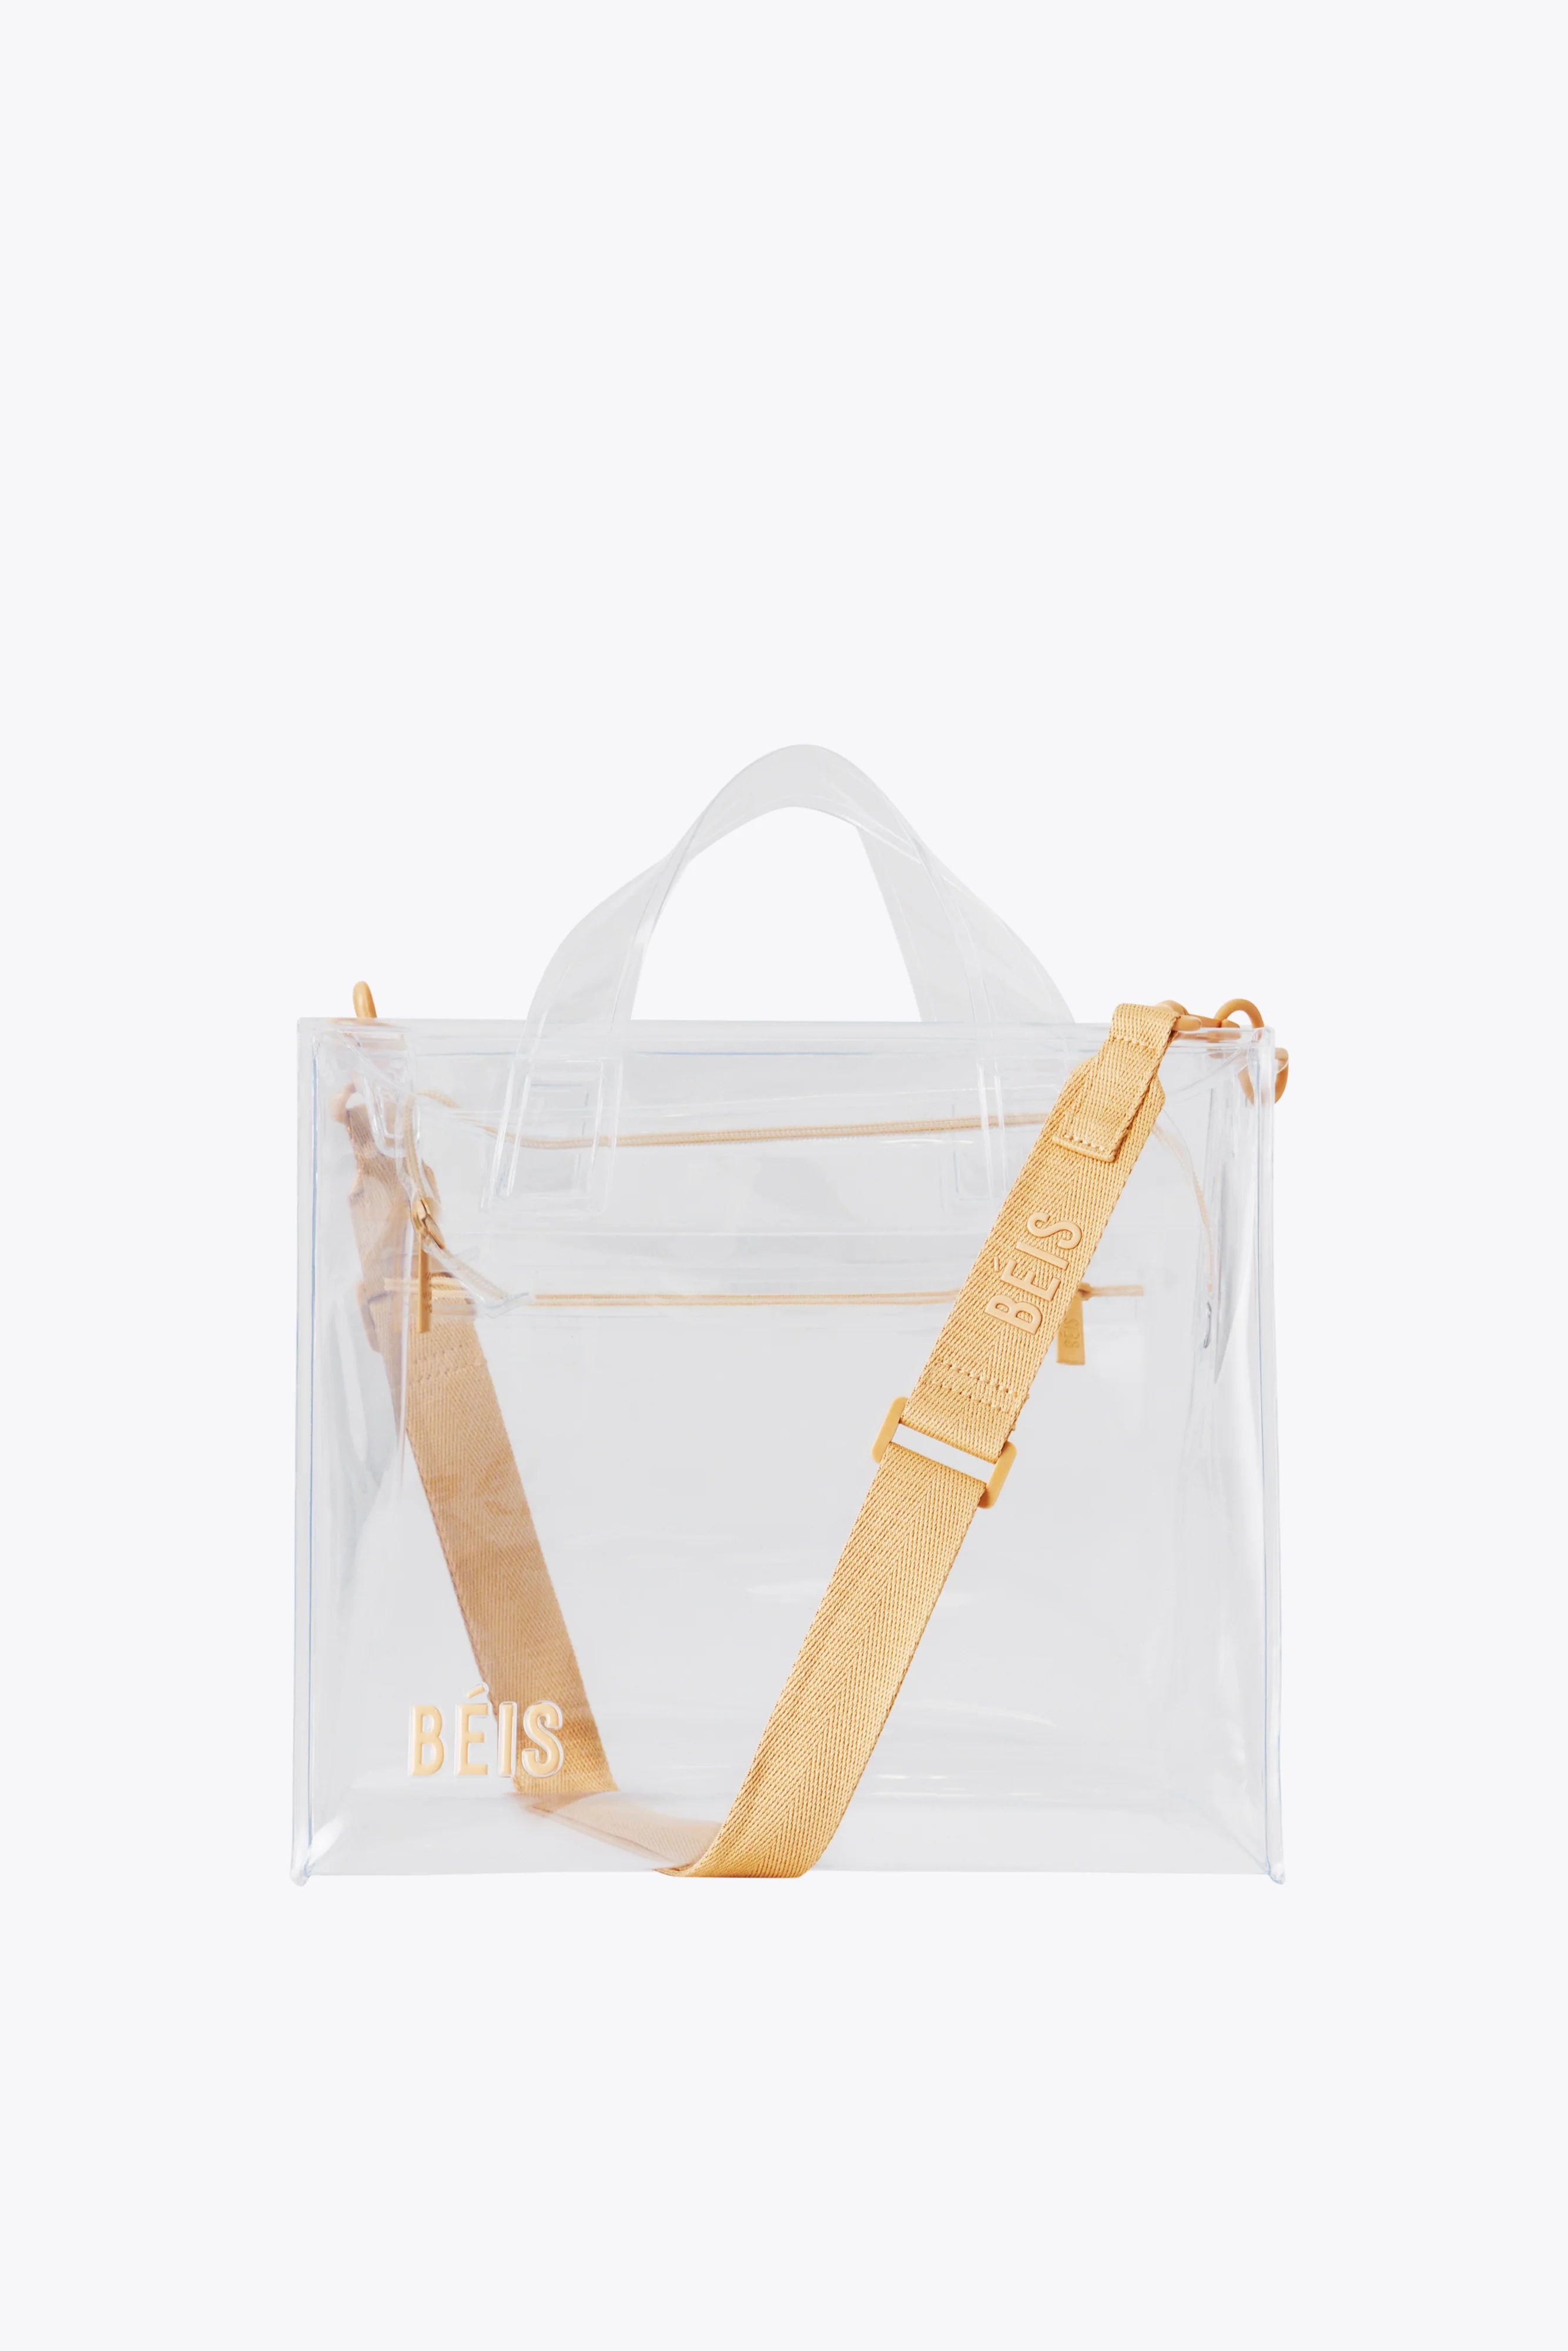 THE STADIUM TOTE IN CLEAR | BÉIS Travel